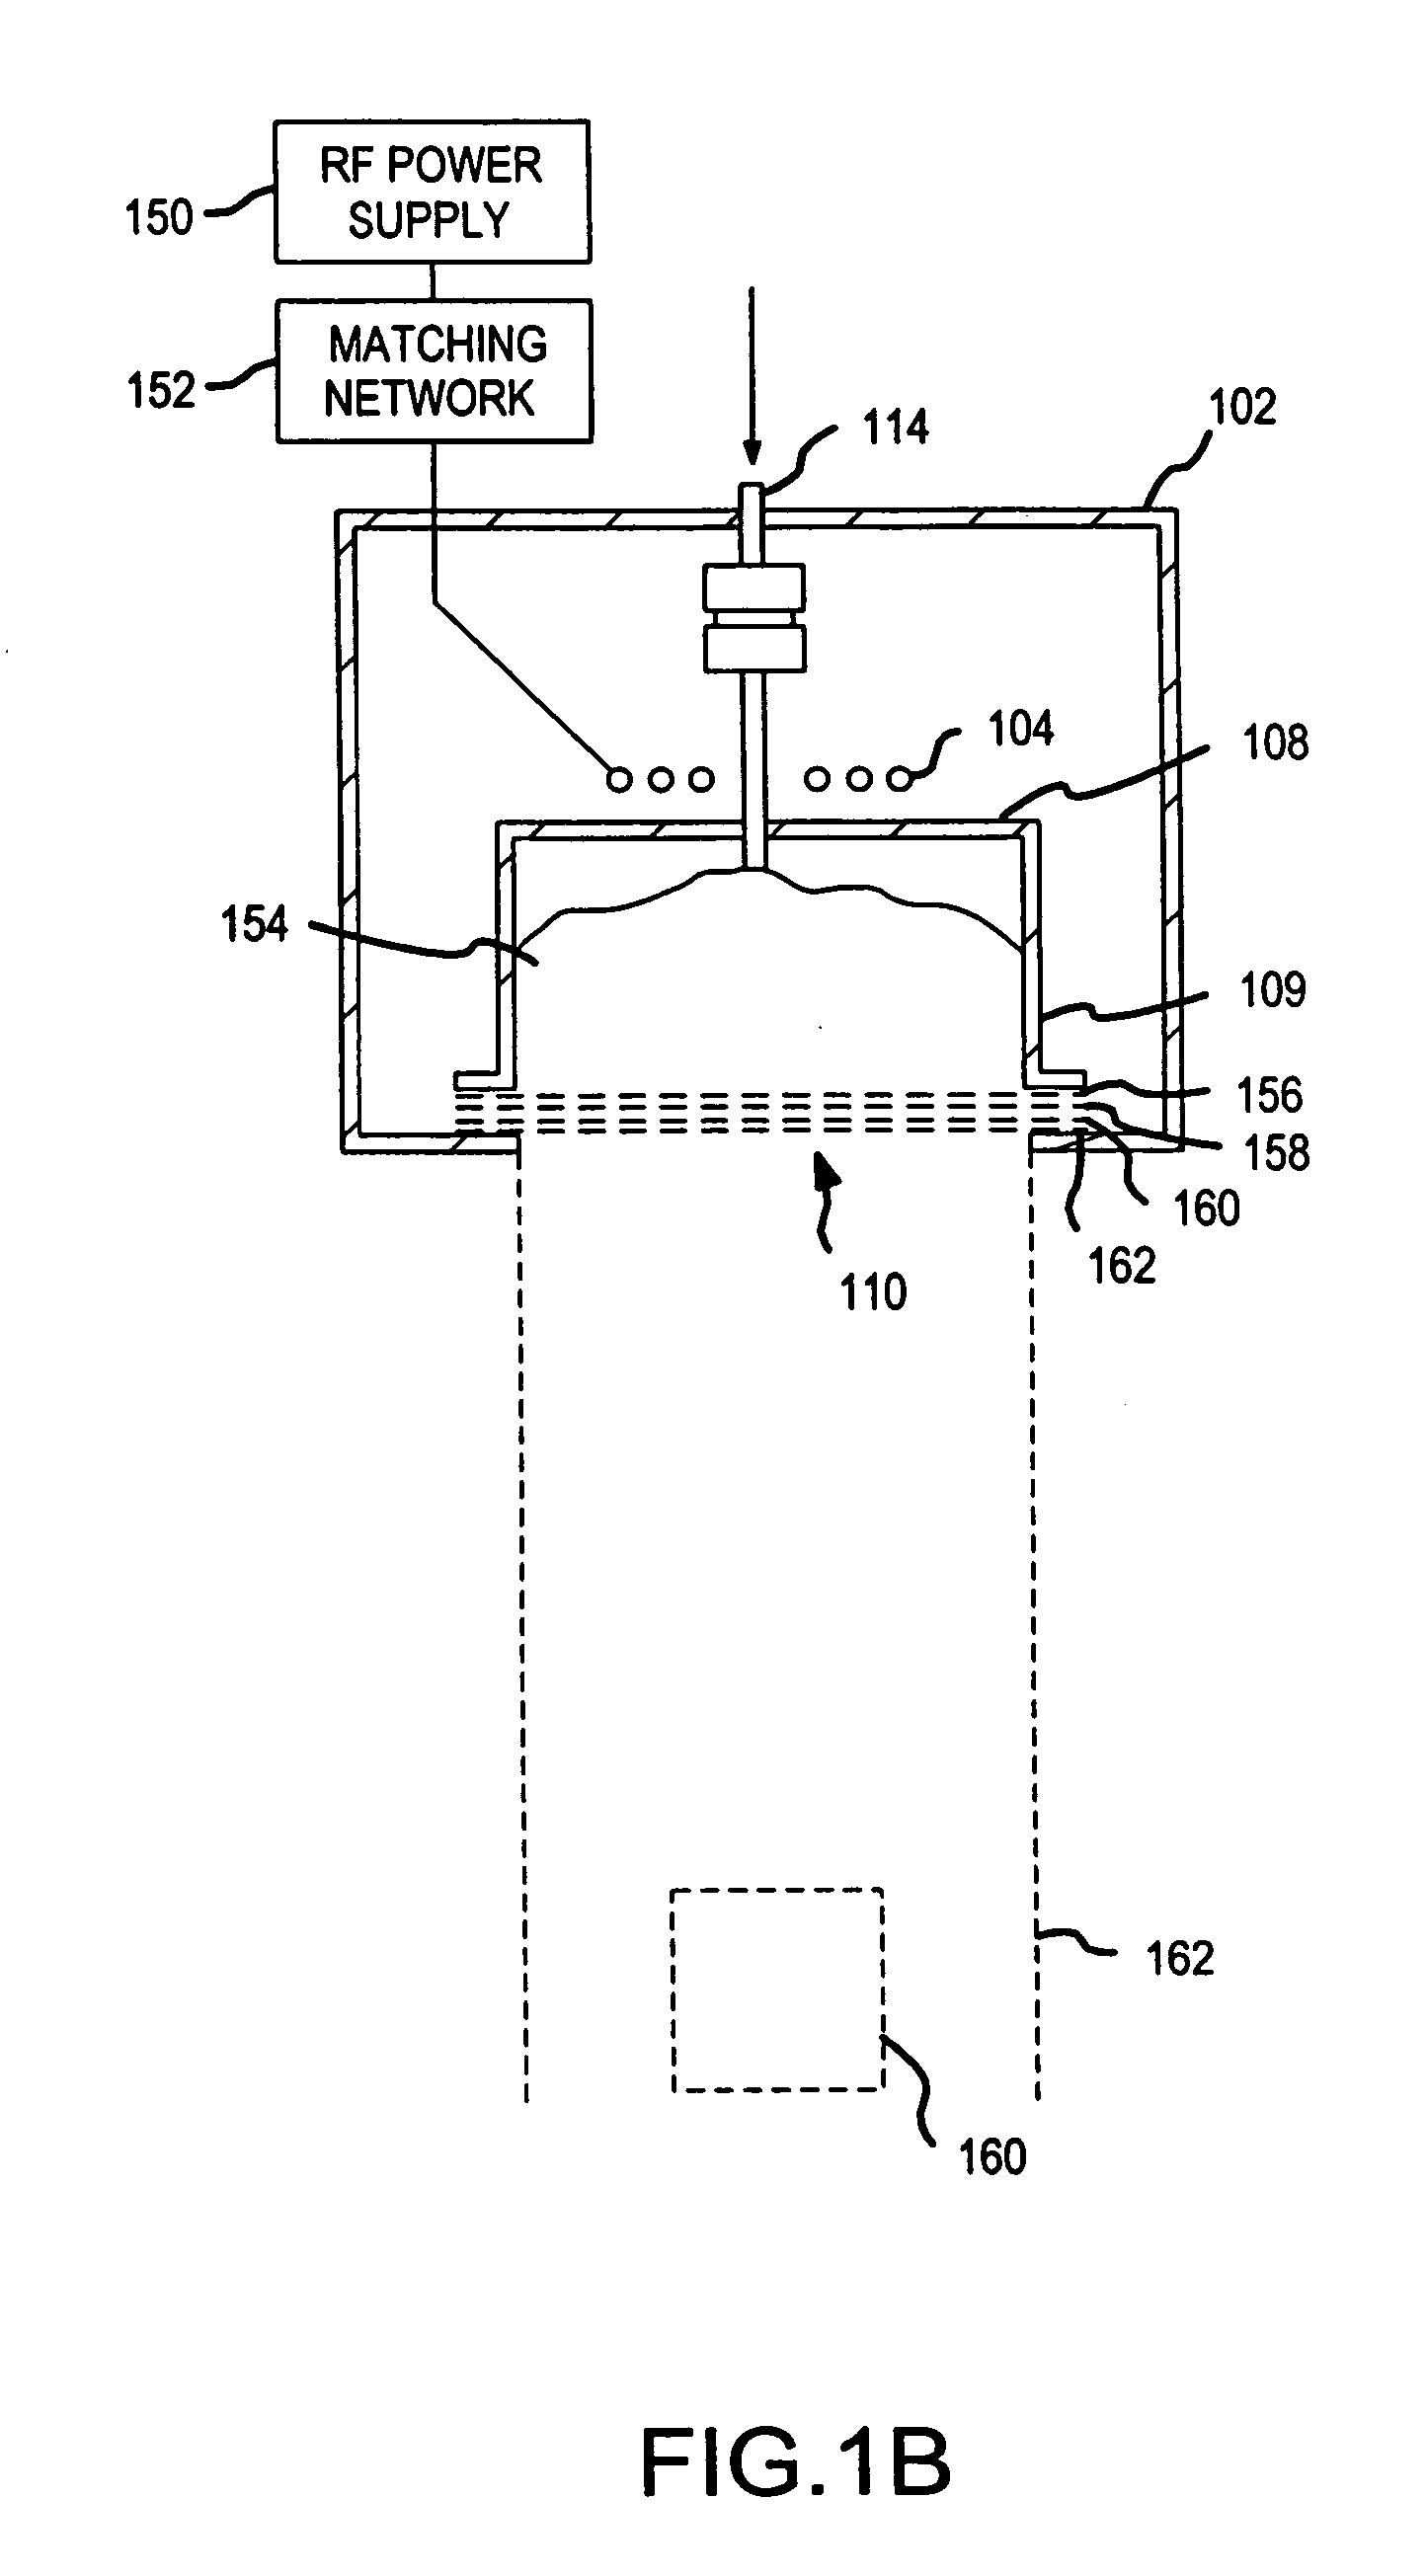 Multi-grid ion beam source for generating a highly collimated ion beam